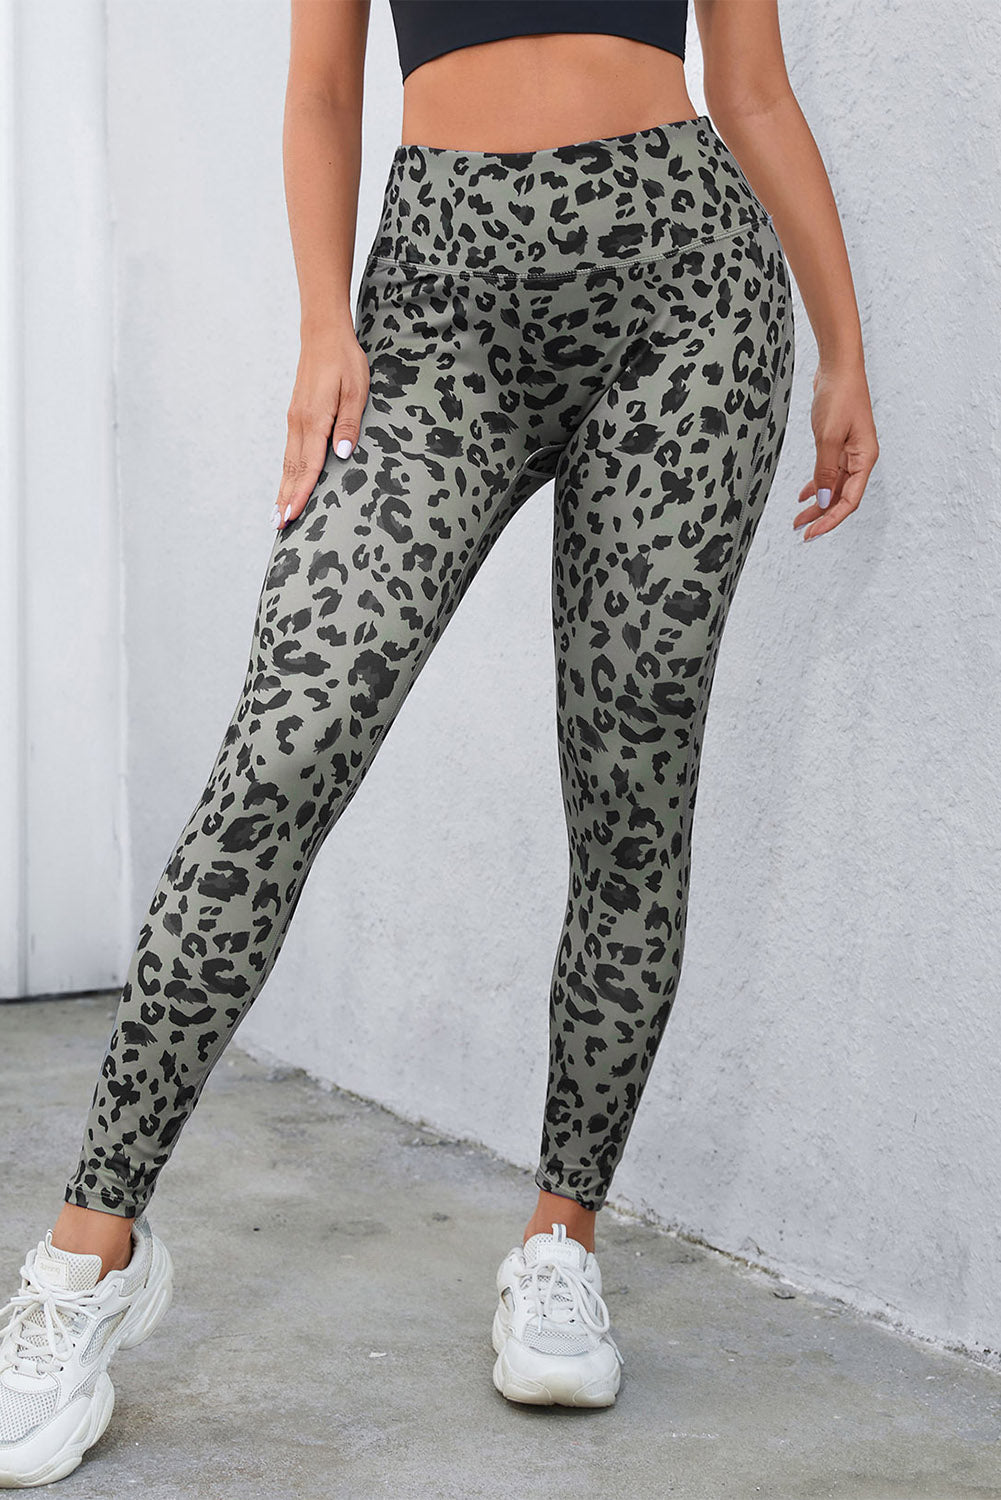 Buy Black/Green Animal Print Active New & Improved High Rise